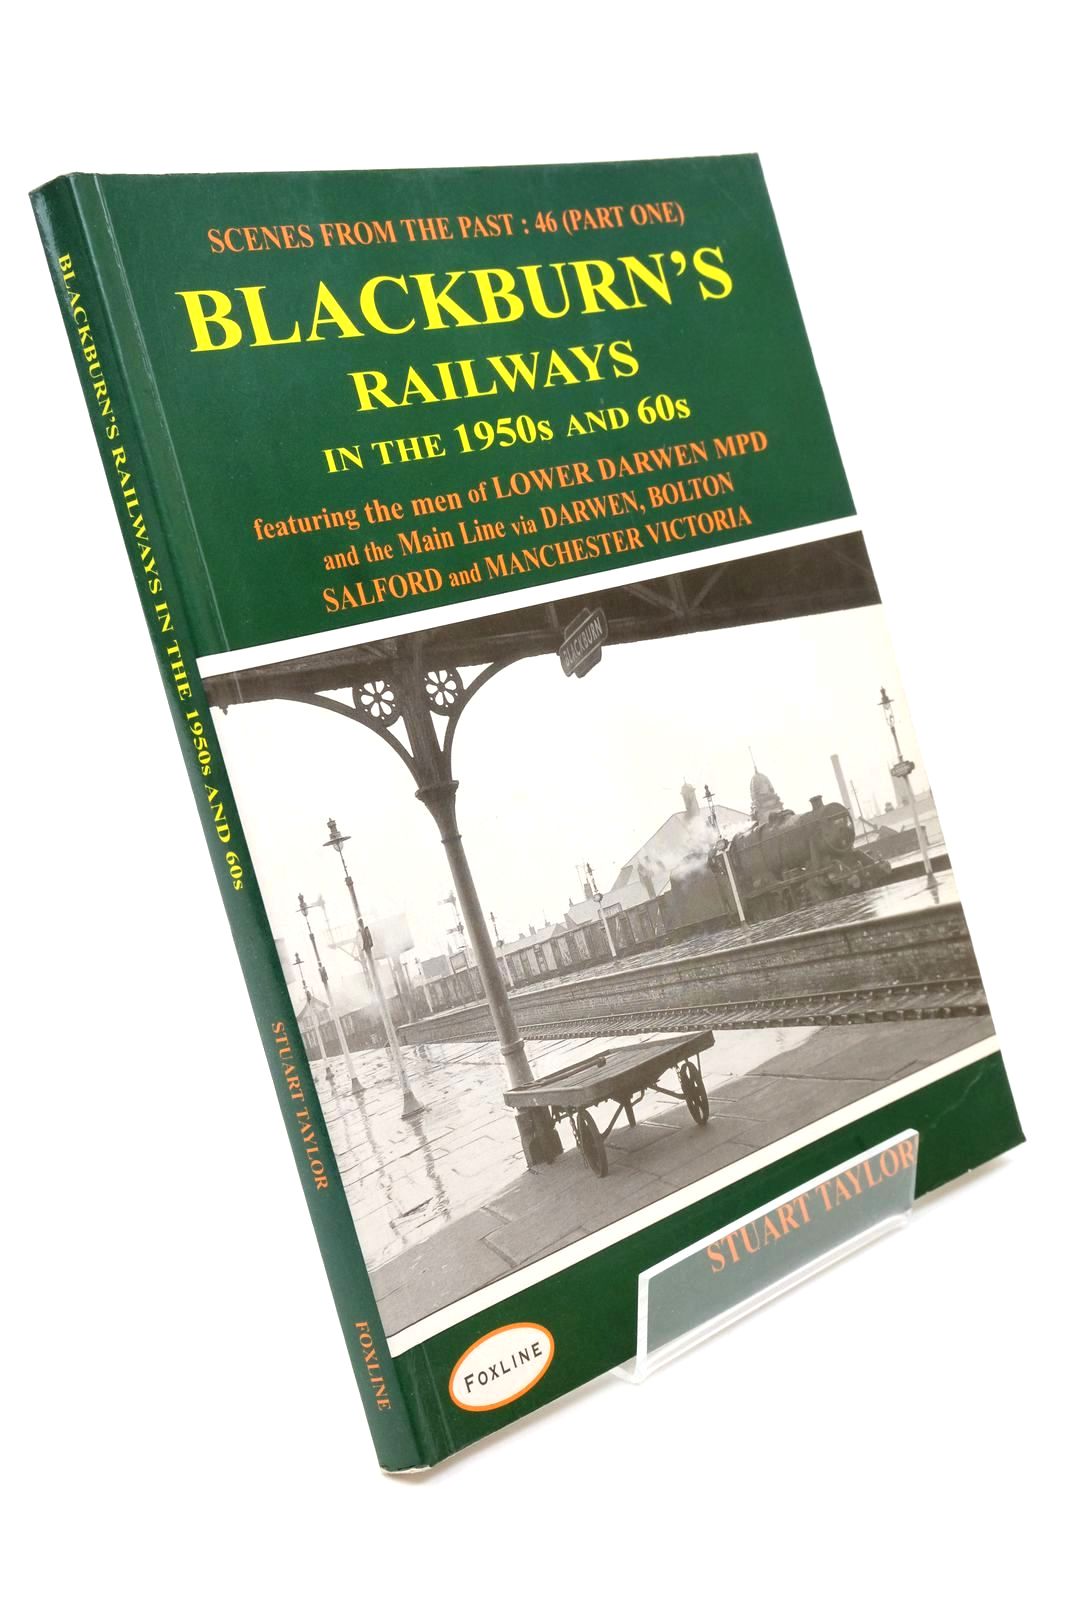 Photo of BLACKBURN'S RAILWAYS IN THE 1950'S AND '60'S (SCENES FROM THE PAST: 46 PART ONE) written by Taylor, Stuart published by Foxline (STOCK CODE: 1322458)  for sale by Stella & Rose's Books